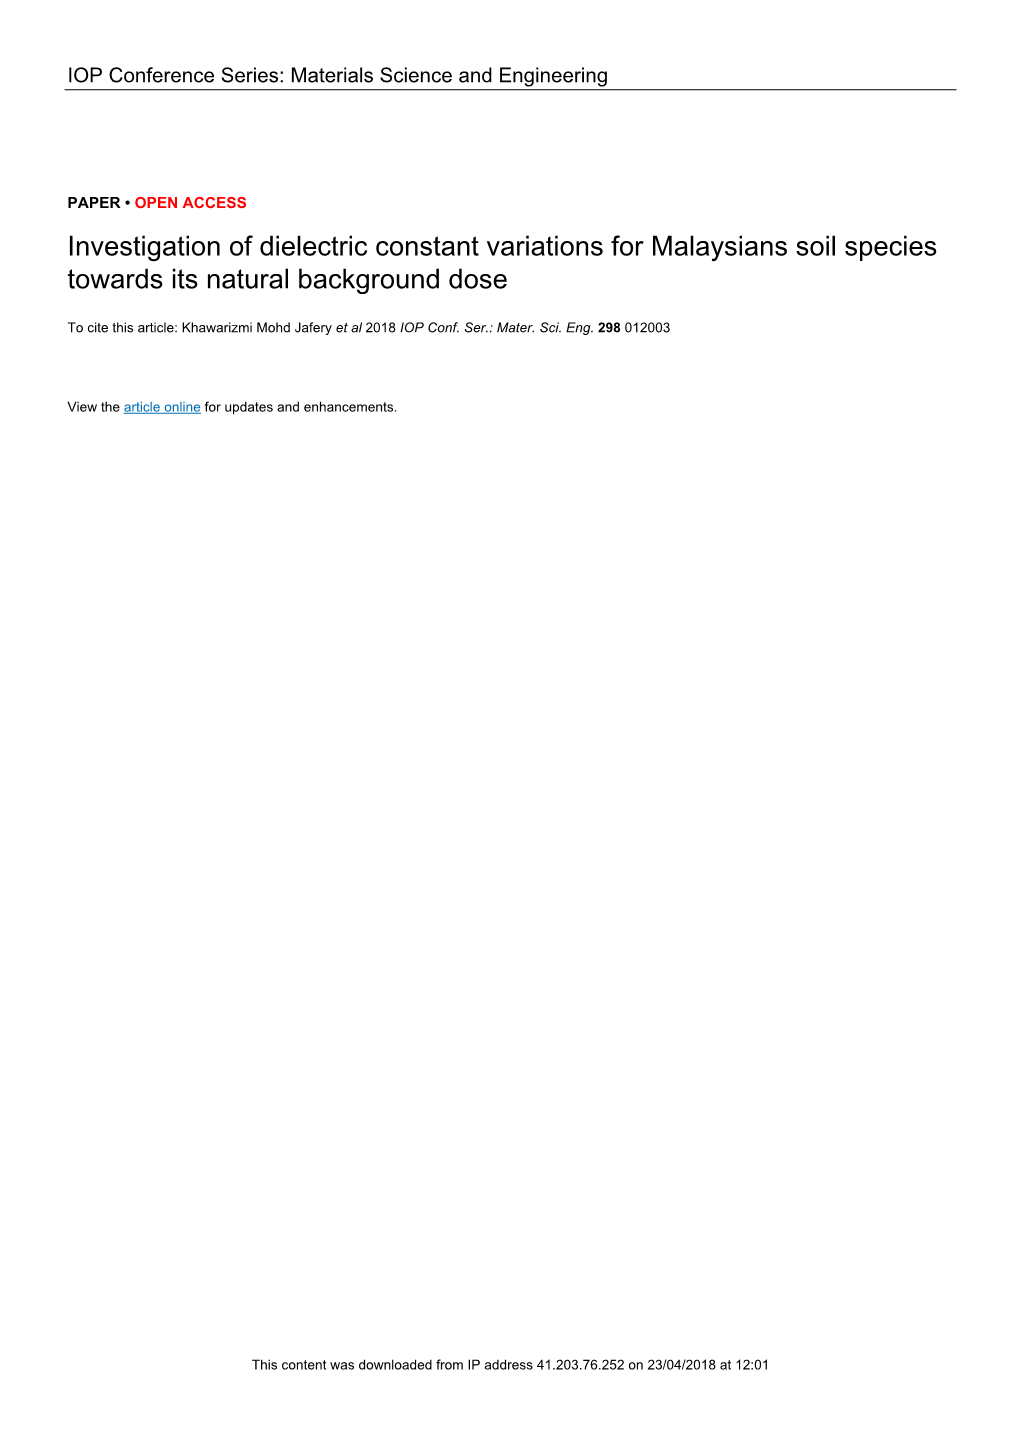 Investigation of Dielectric Constant Variations for Malaysians Soil Species Towards Its Natural Background Dose